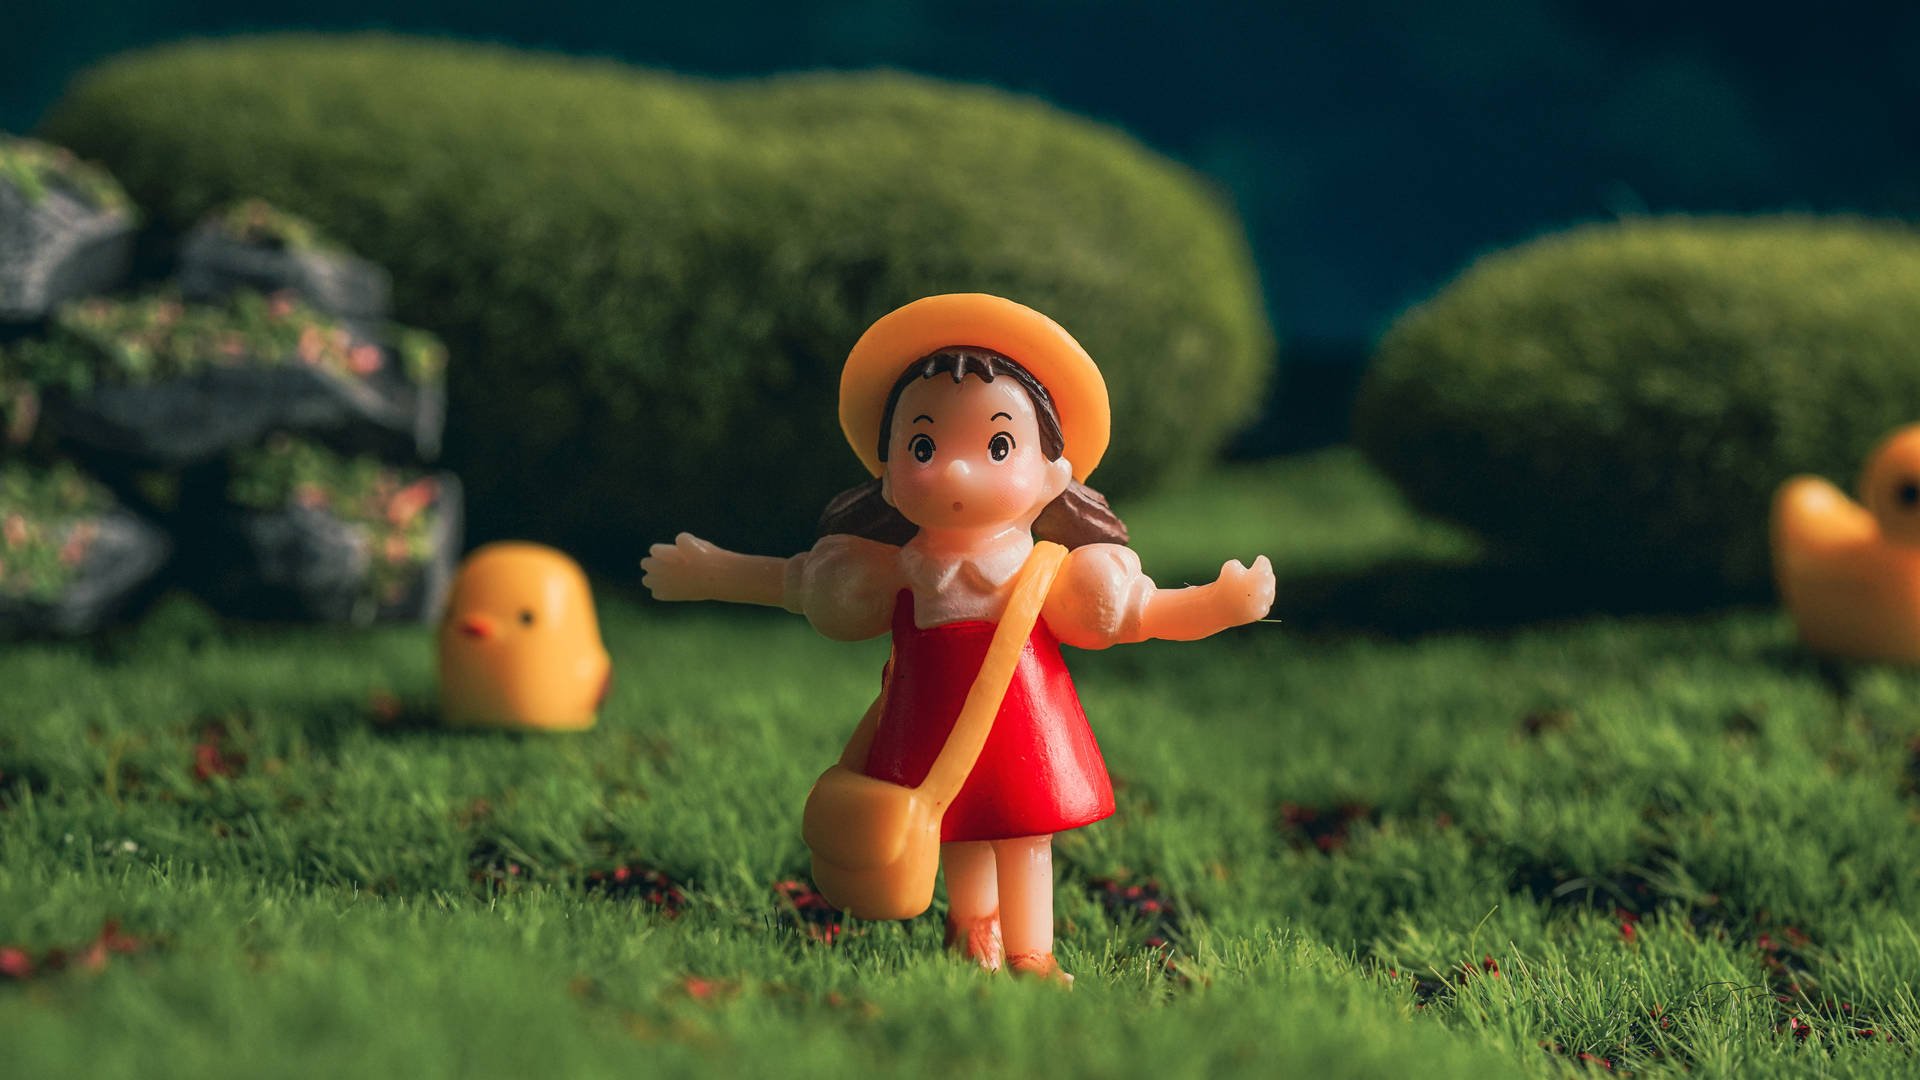 Little Girl With Yellow Hat Animated Desktop Wallpaper